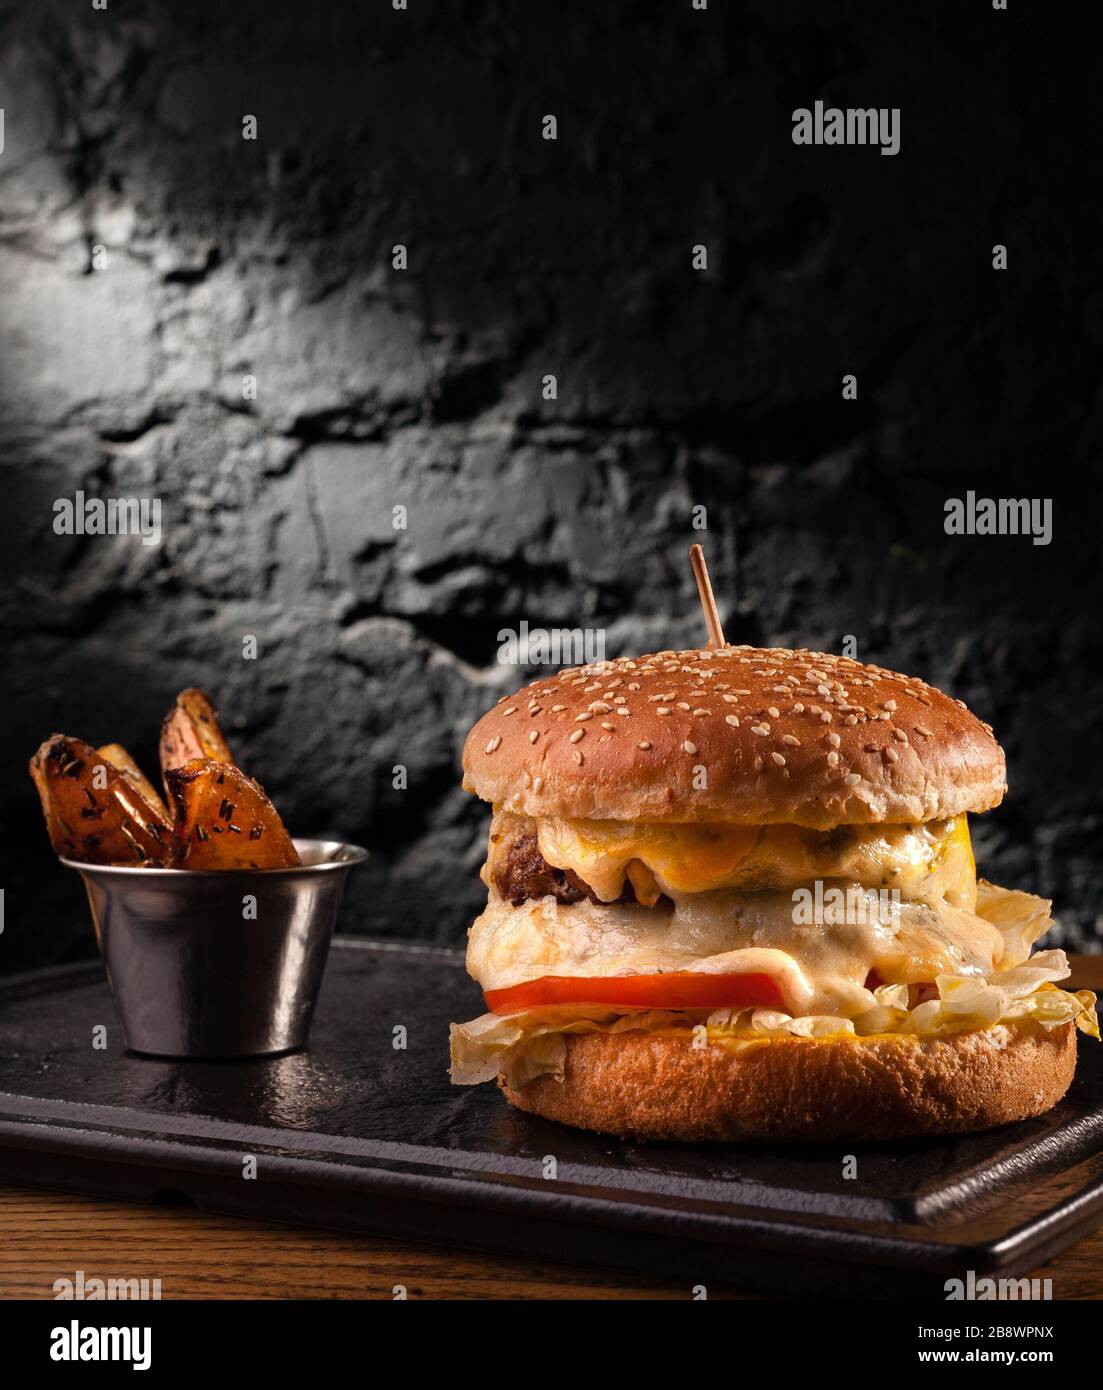 Big cheeseburger with lots of cheese. Stock photo side view of a cheeseburger on a black brick wall background. Stock Photo